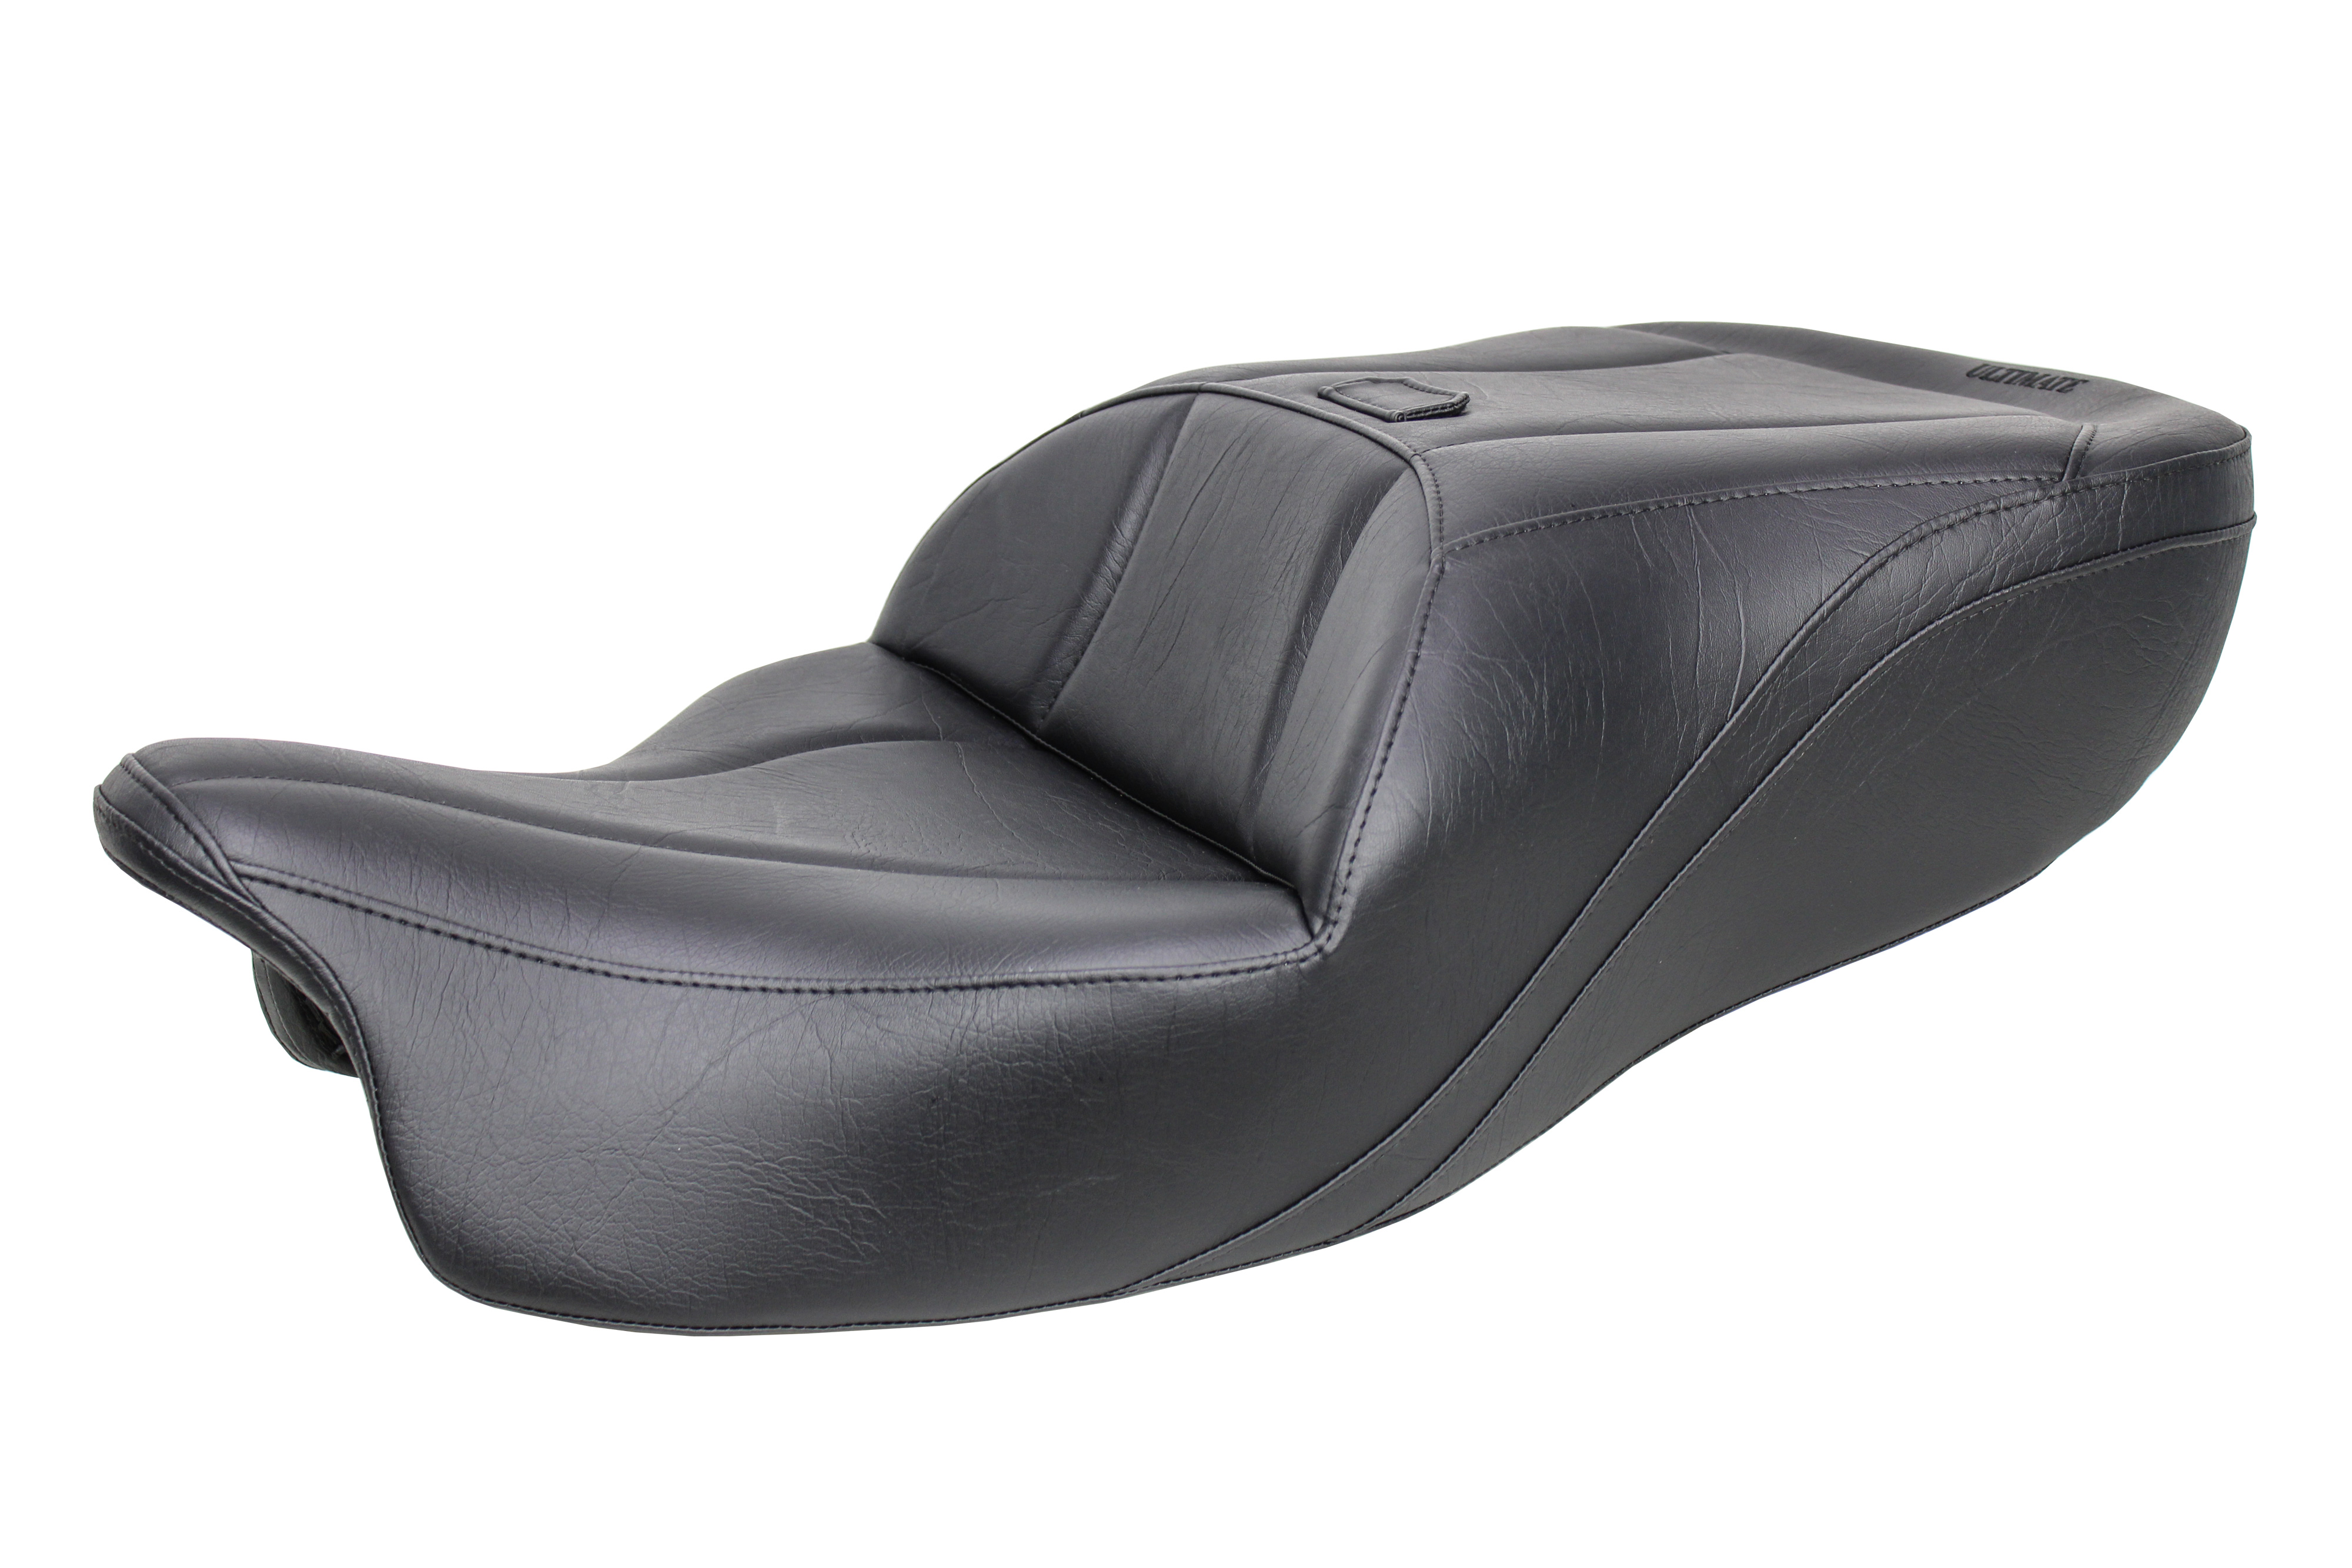 FLH® 2014 and Newer Ultimate Touring 1-Piece Seat